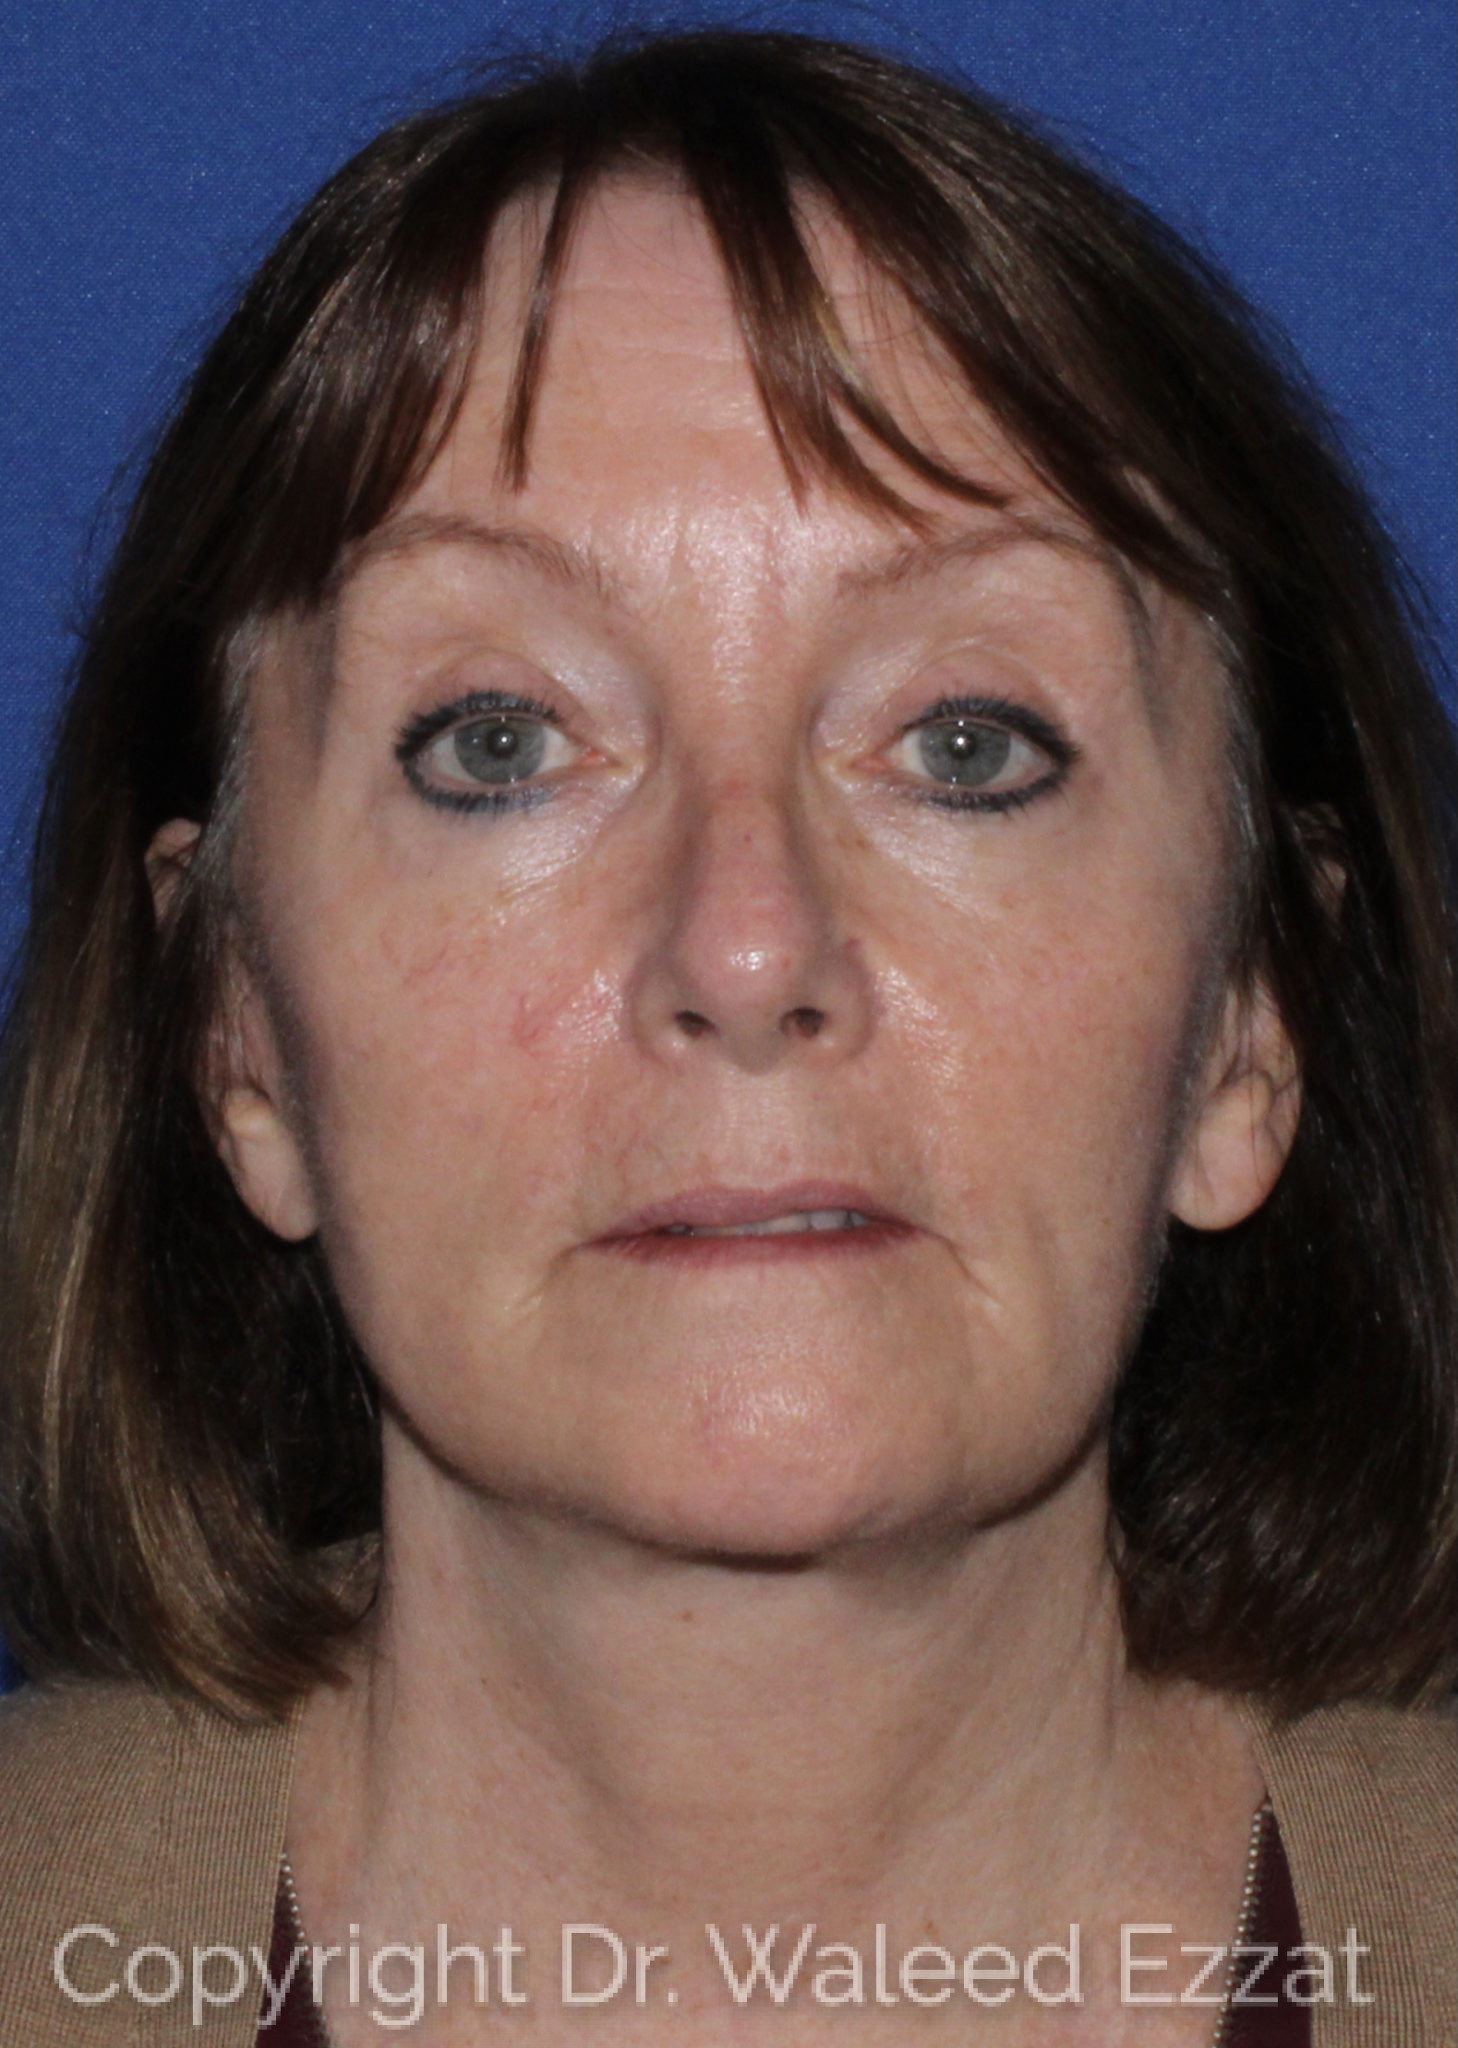 Blepharoplasty Patient Photo - Case 3 - after view